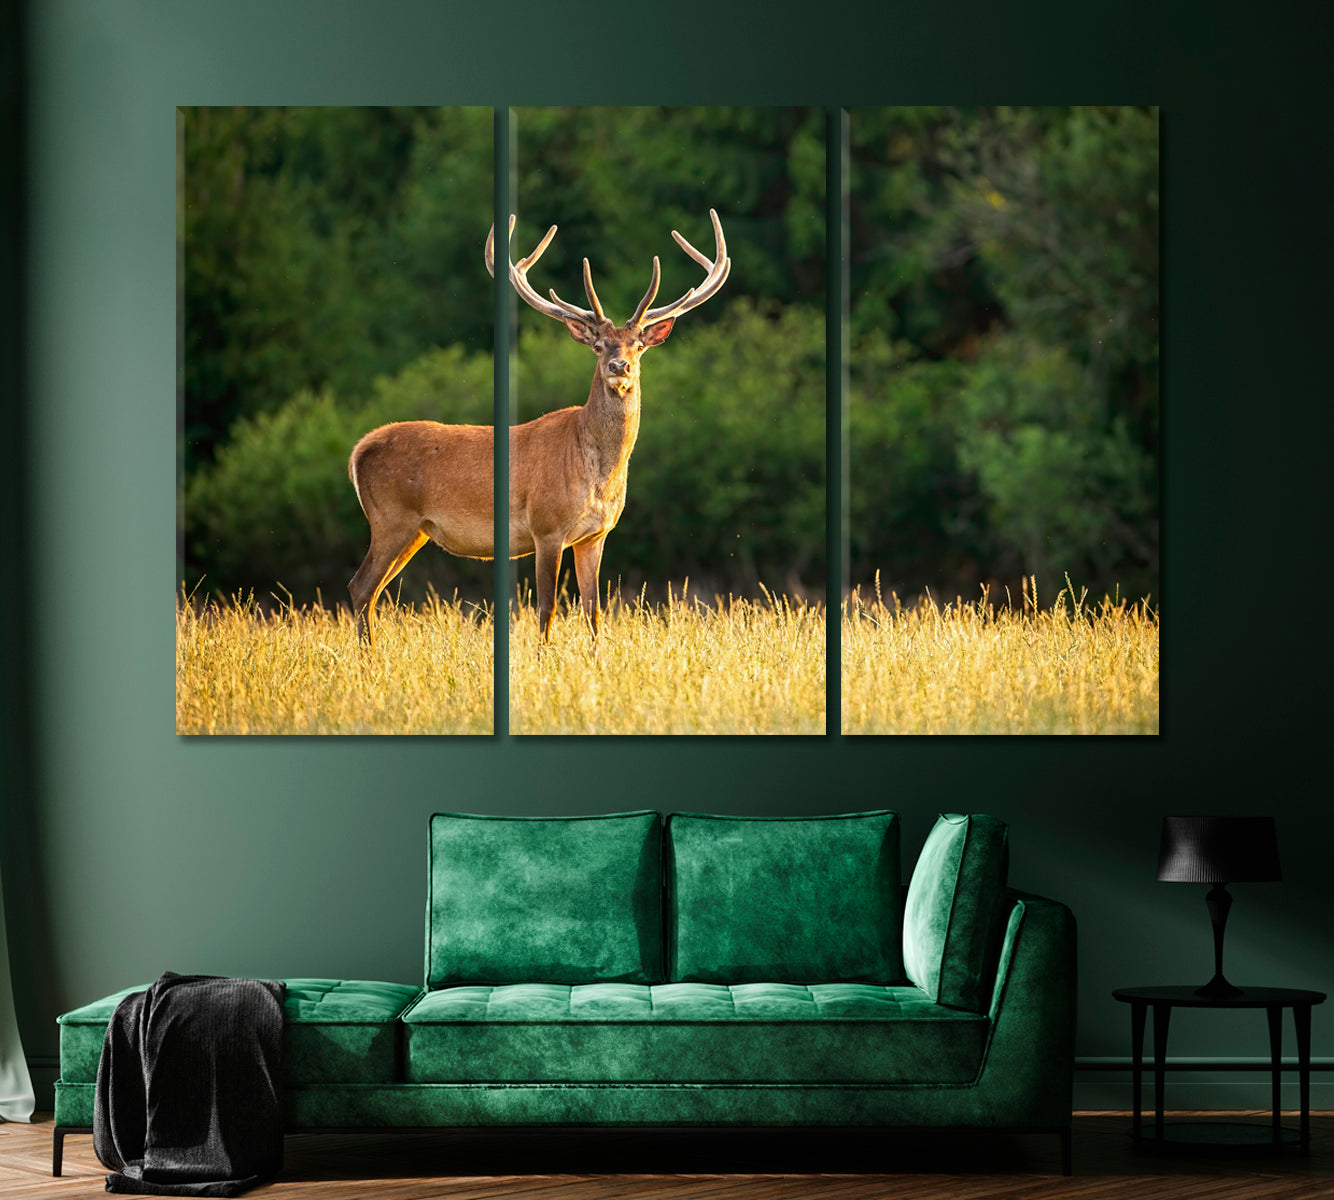 Deer in the Field Canvas Print-Canvas Print-CetArt-1 Panel-24x16 inches-CetArt